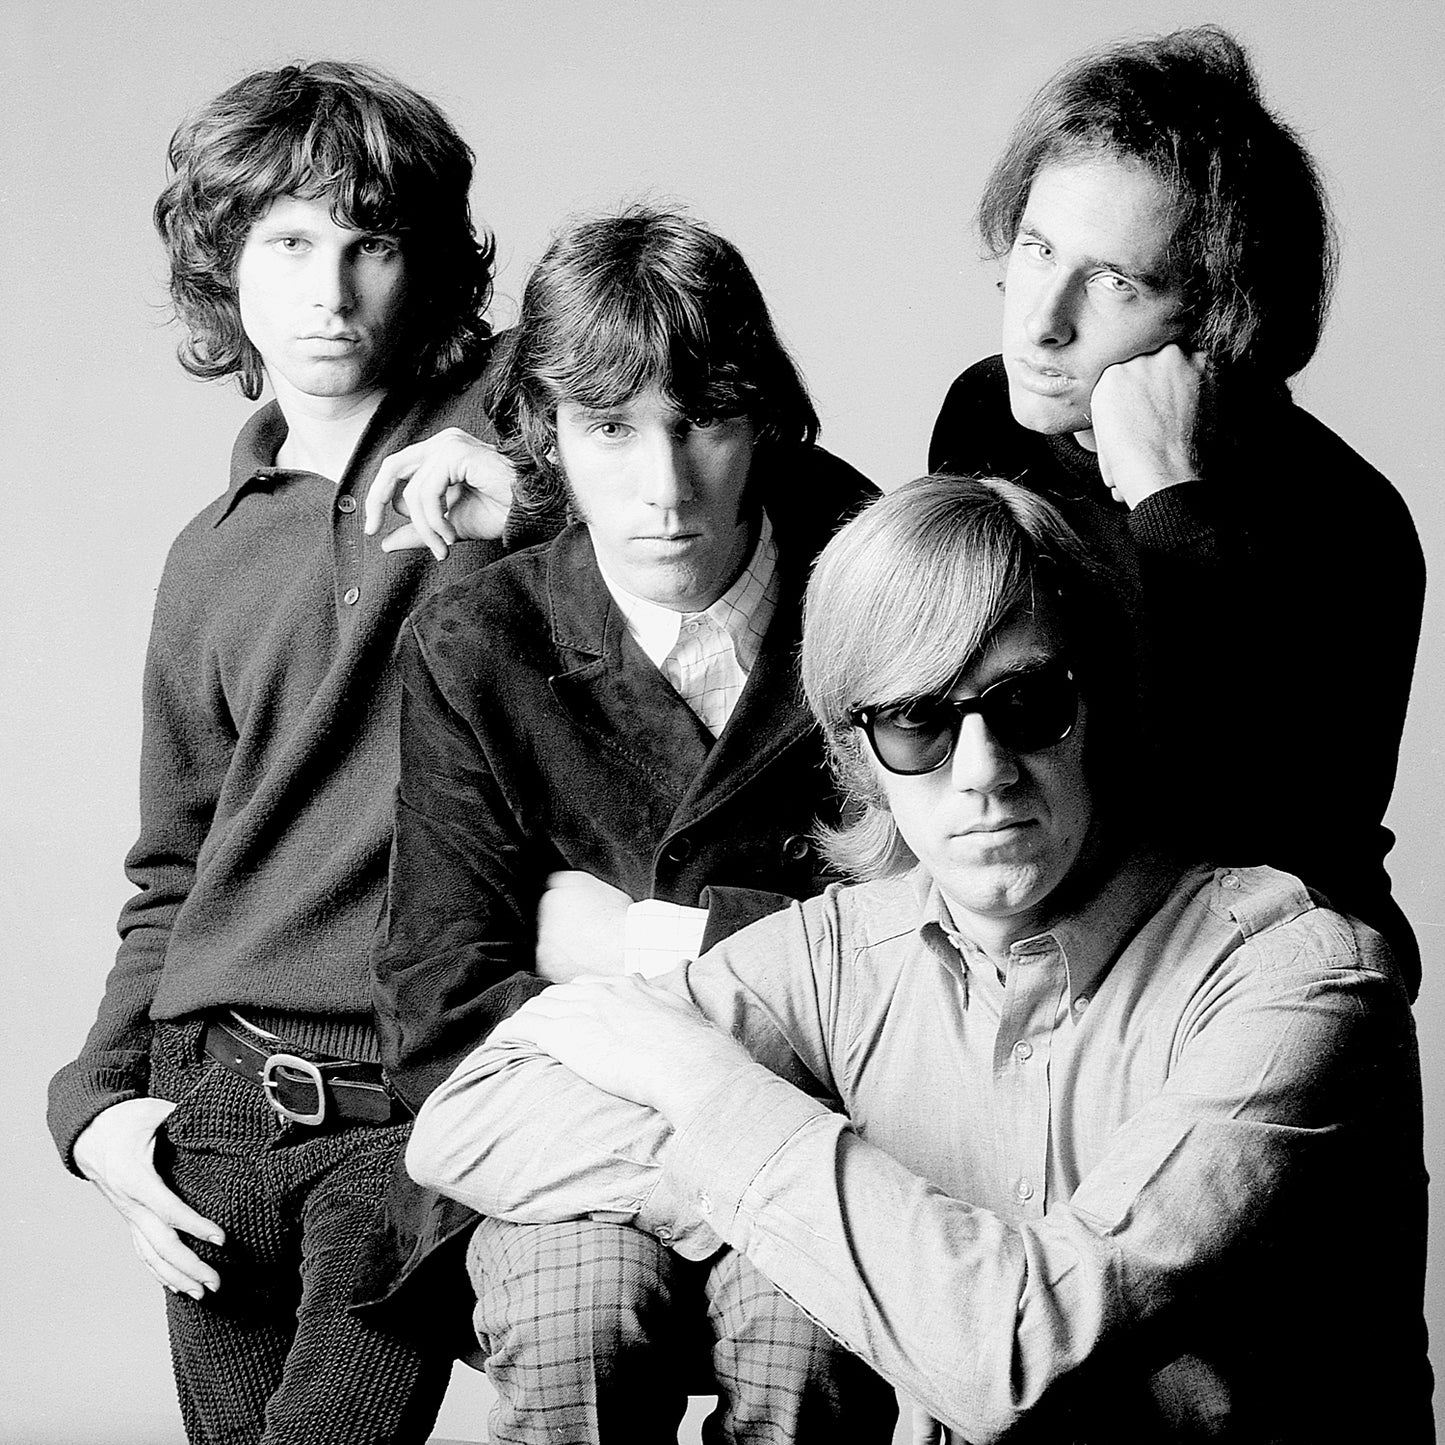 The Doors, "First Photo Shoot" New York City, 1967 by Joel Brodsky